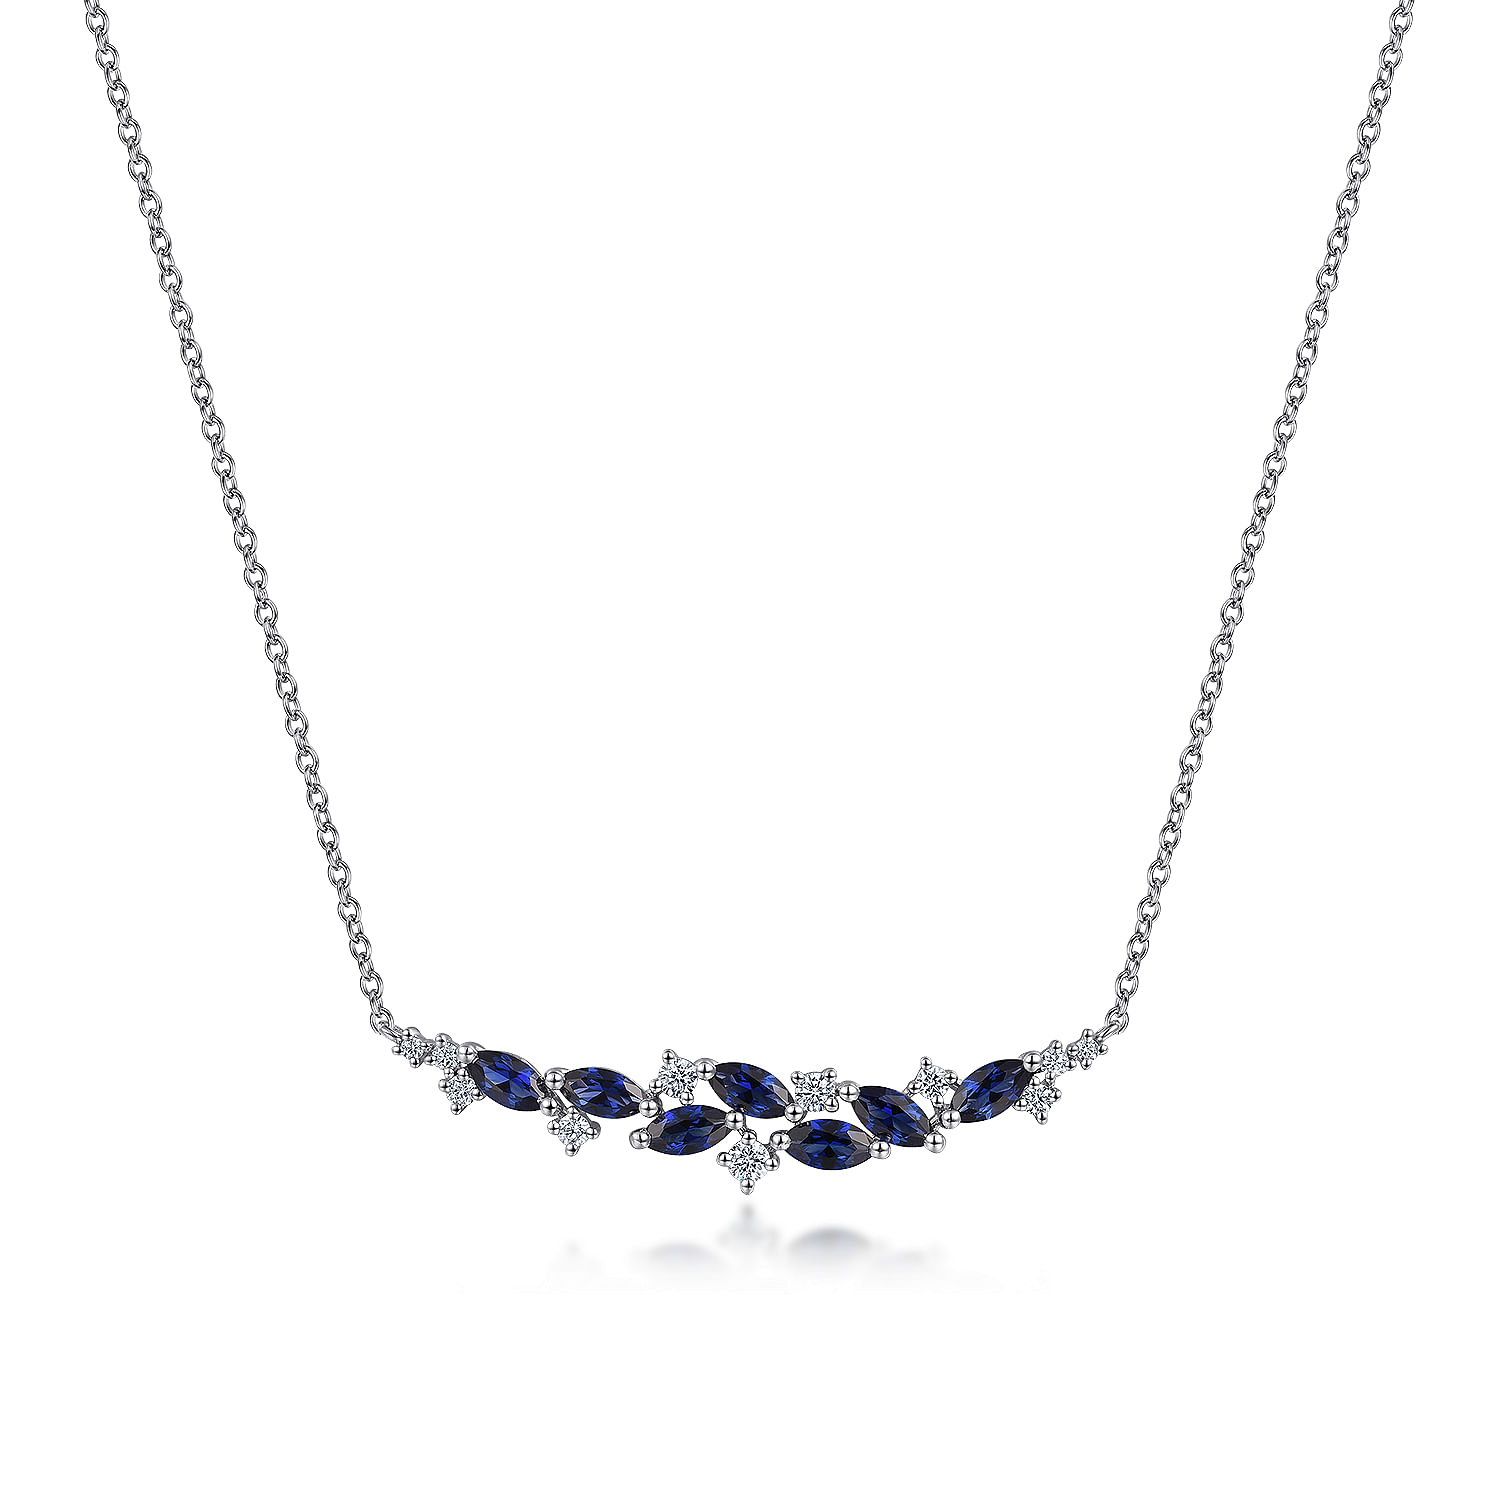 Gabriel - 14K White Gold Diamond and Marquise Blue Sapphire Bar Necklace